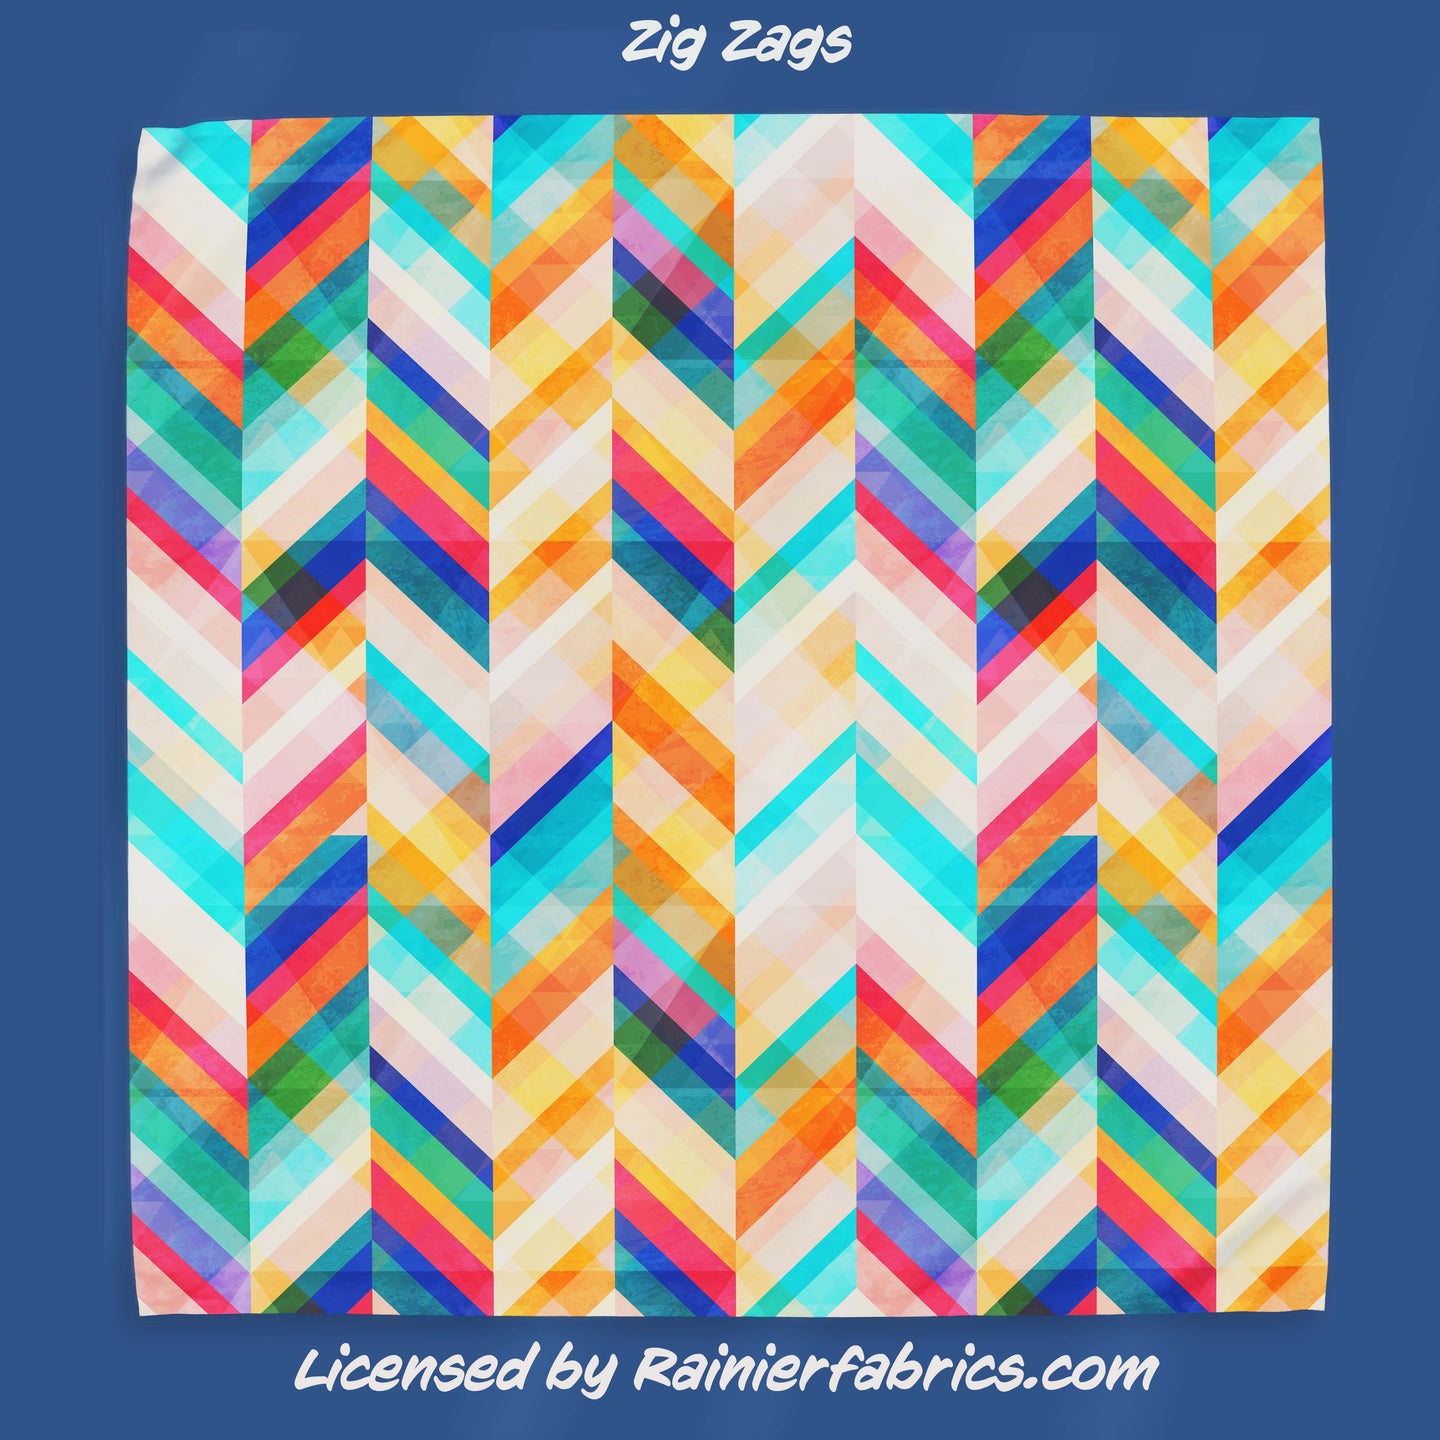 Zig Zags - 2-5 day TAT - Order by 1/2 yard; Blankets and towels available too